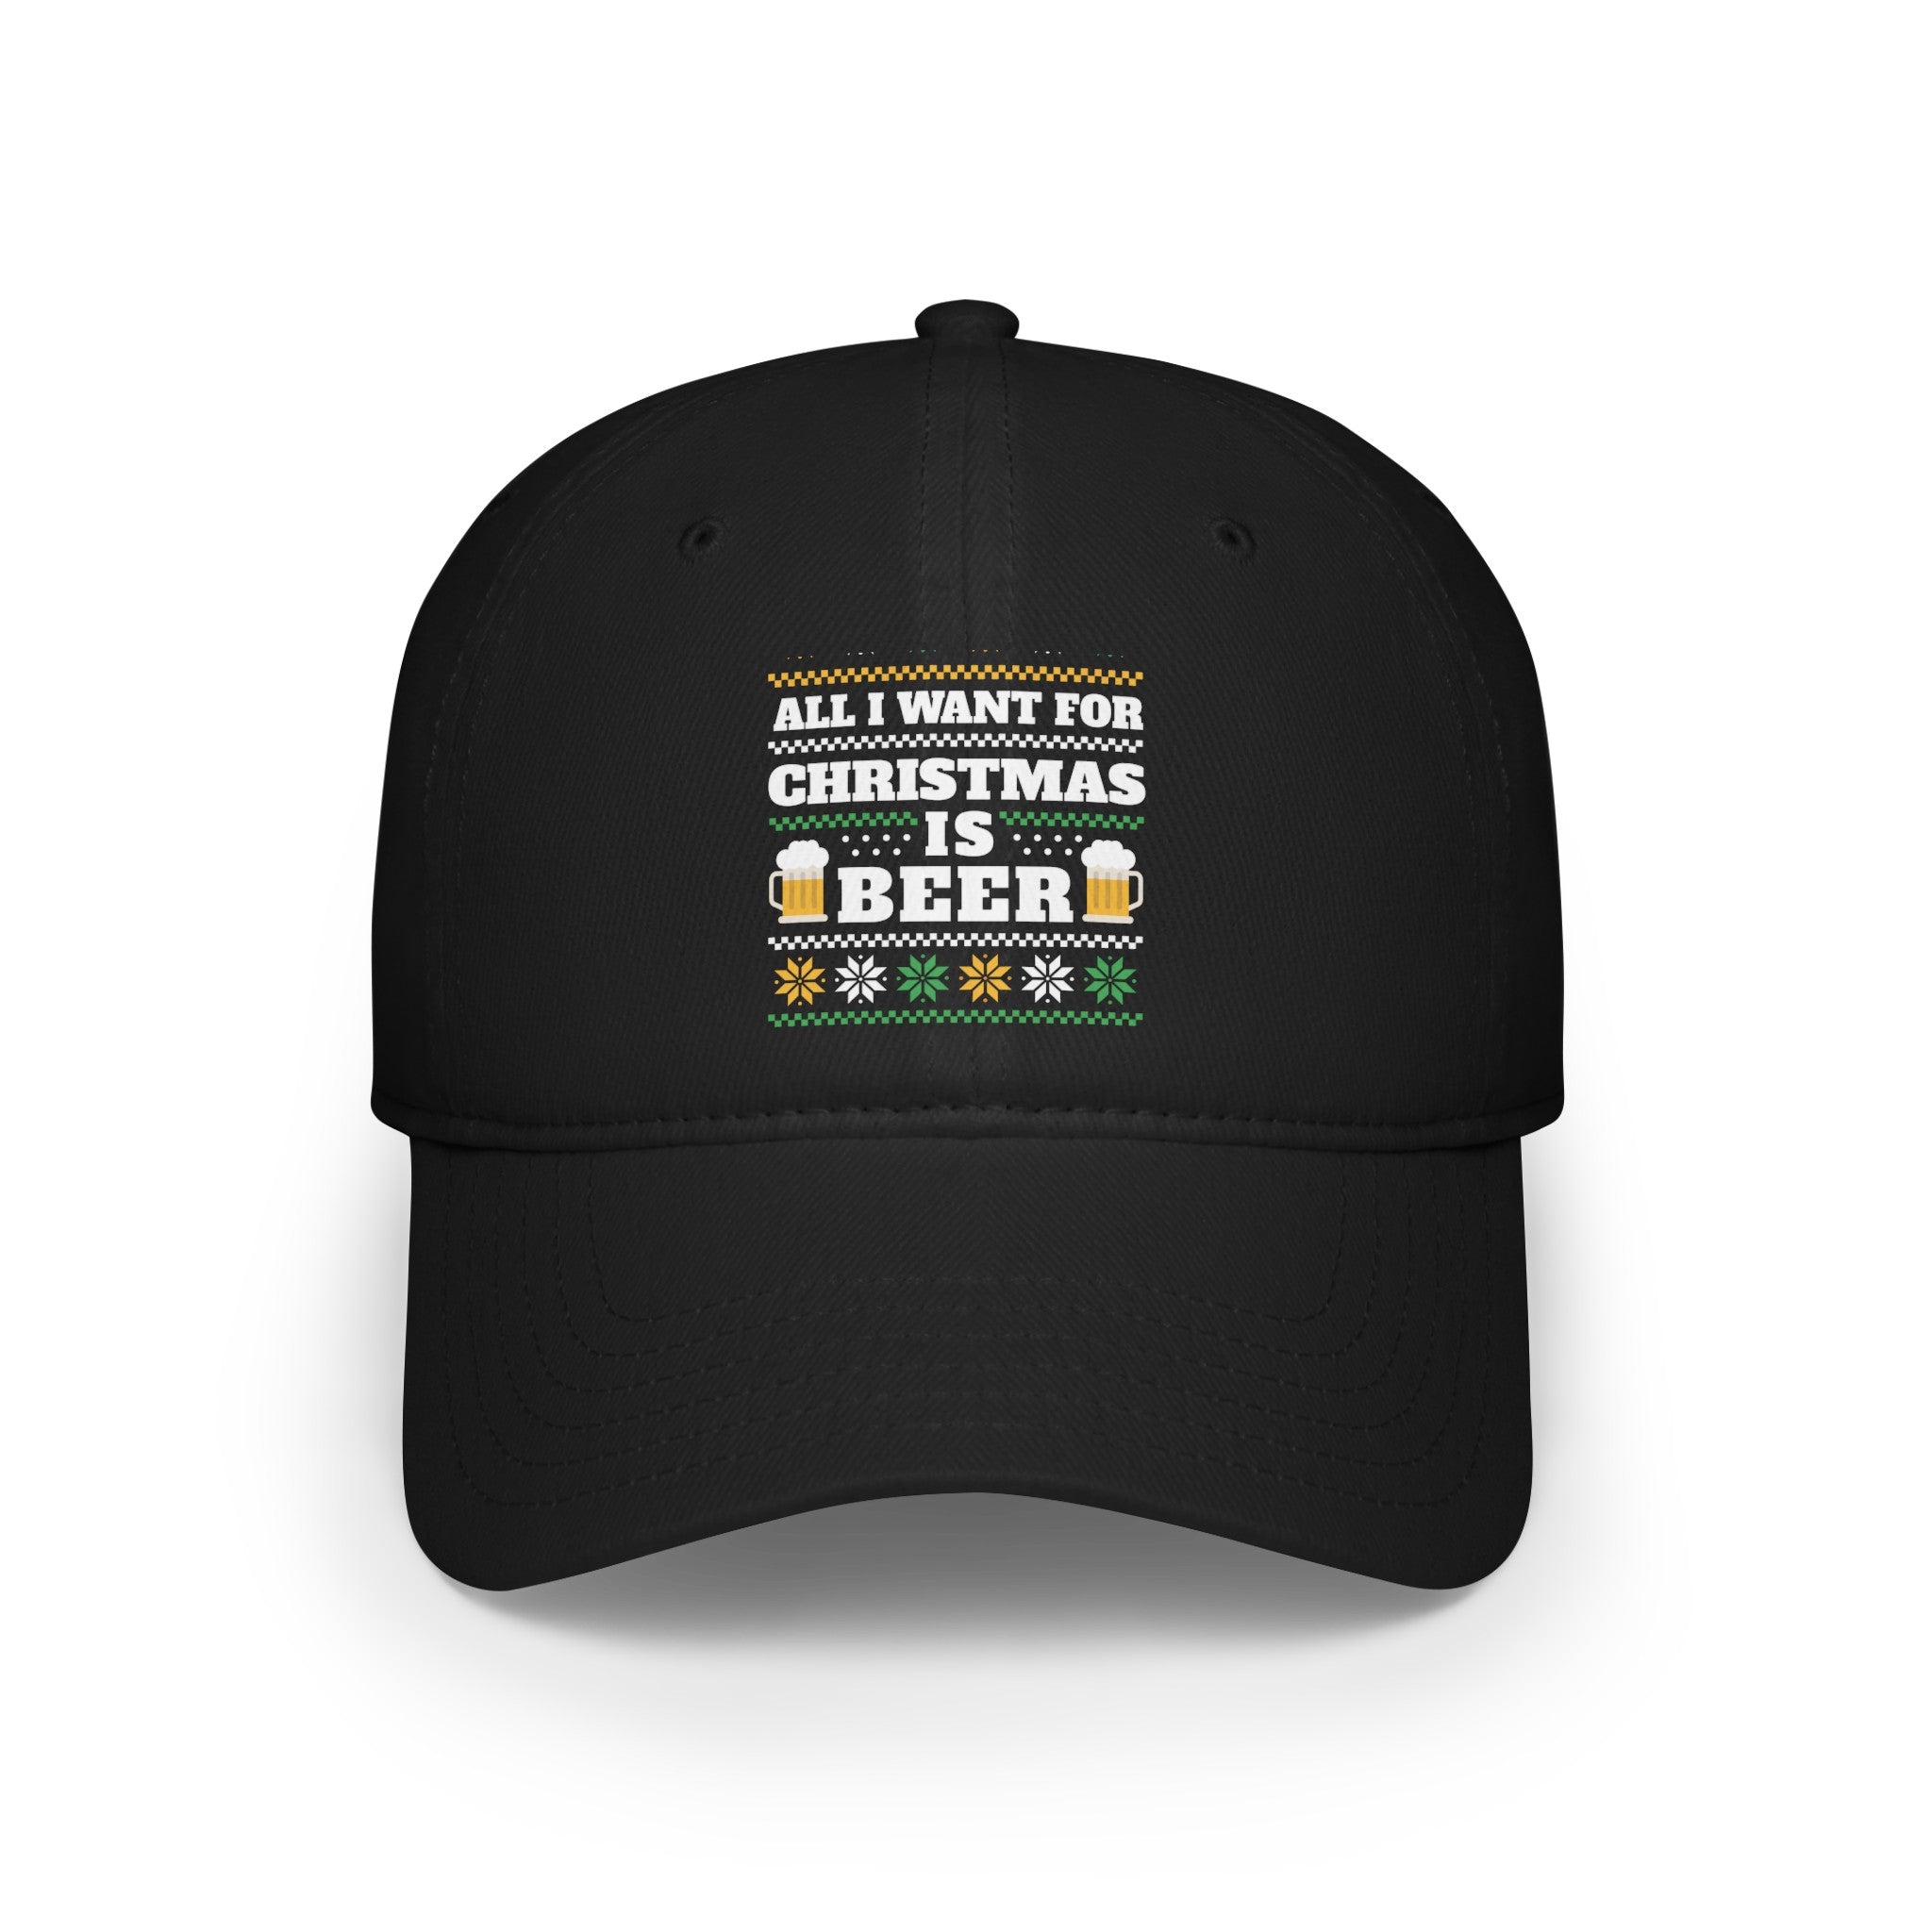 A black Beer Ugly Sweater - Hat with the text "ALL I WANT FOR CHRISTMAS IS BEER" printed in Christmas-themed colors, featuring reinforced stitching for added comfort.